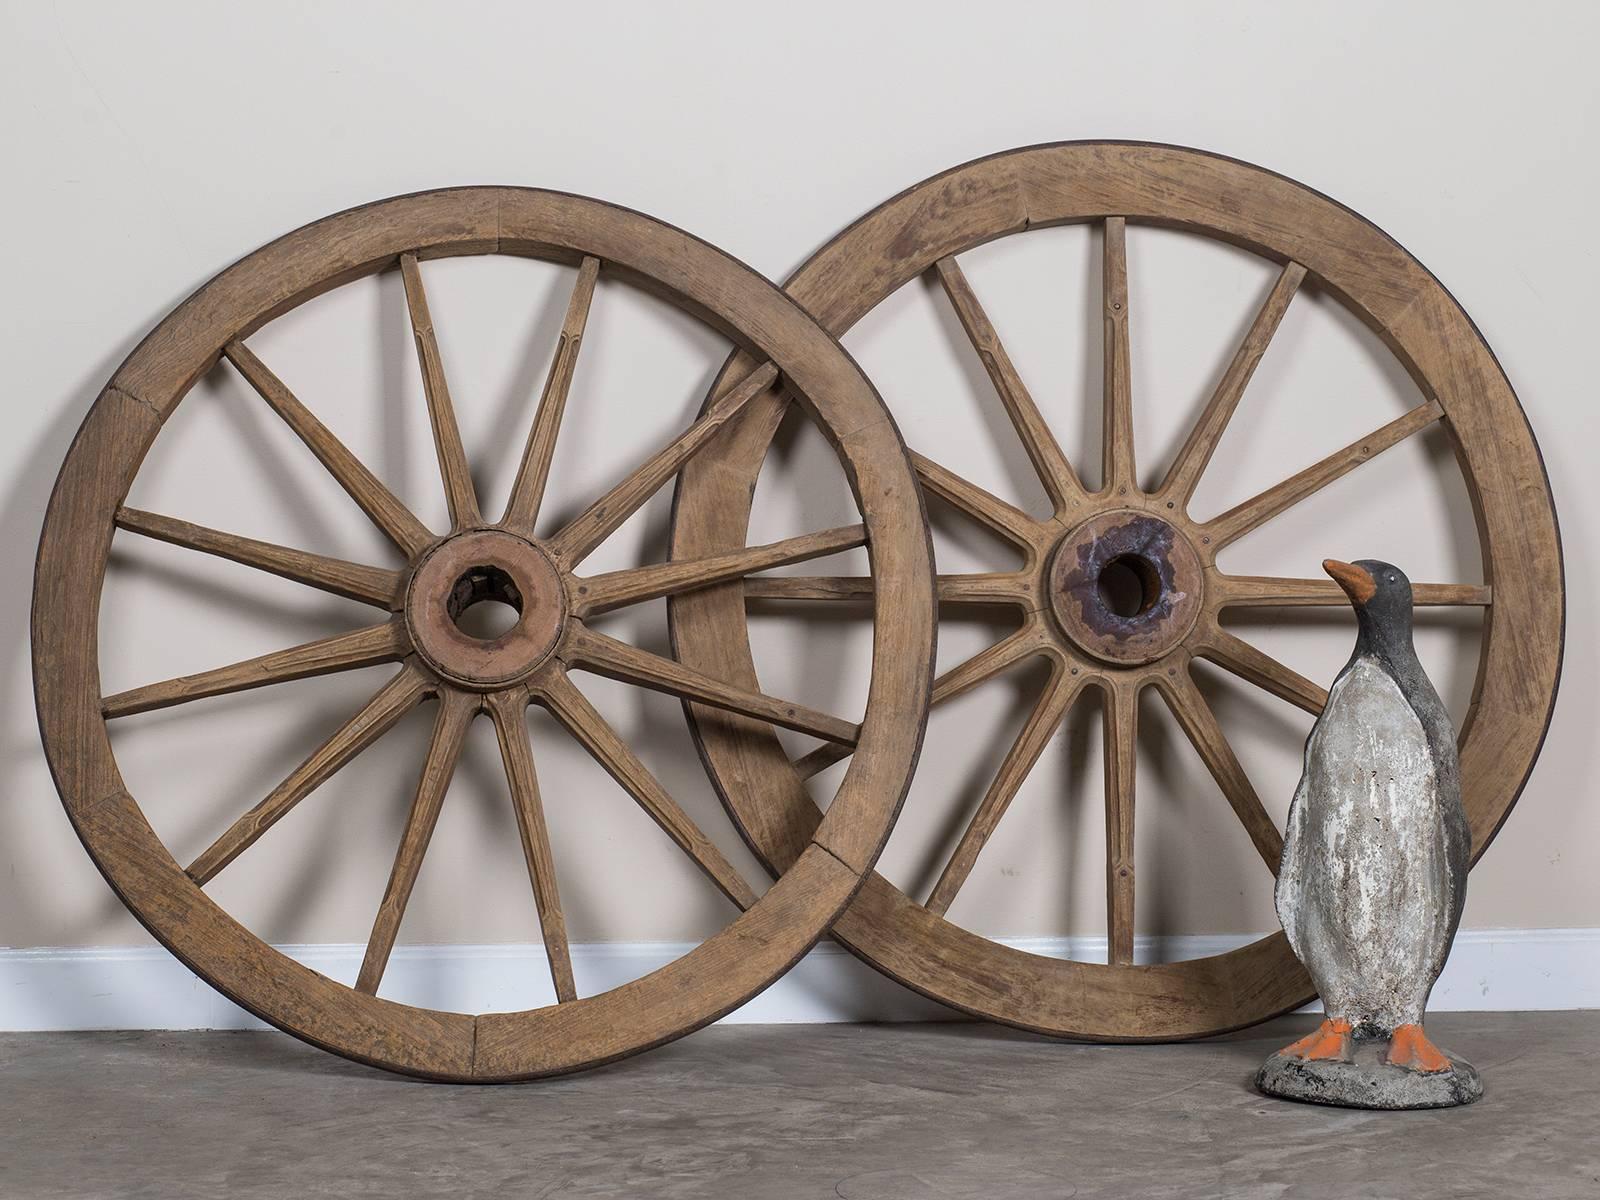 Be the first to see our new listings direct from 1stdibs! Please click "Follow" below.

This pair of enormous antique French wagon wheels, circa 1880 are wonderful artifacts from a bygone era in France. Please notice the construction was